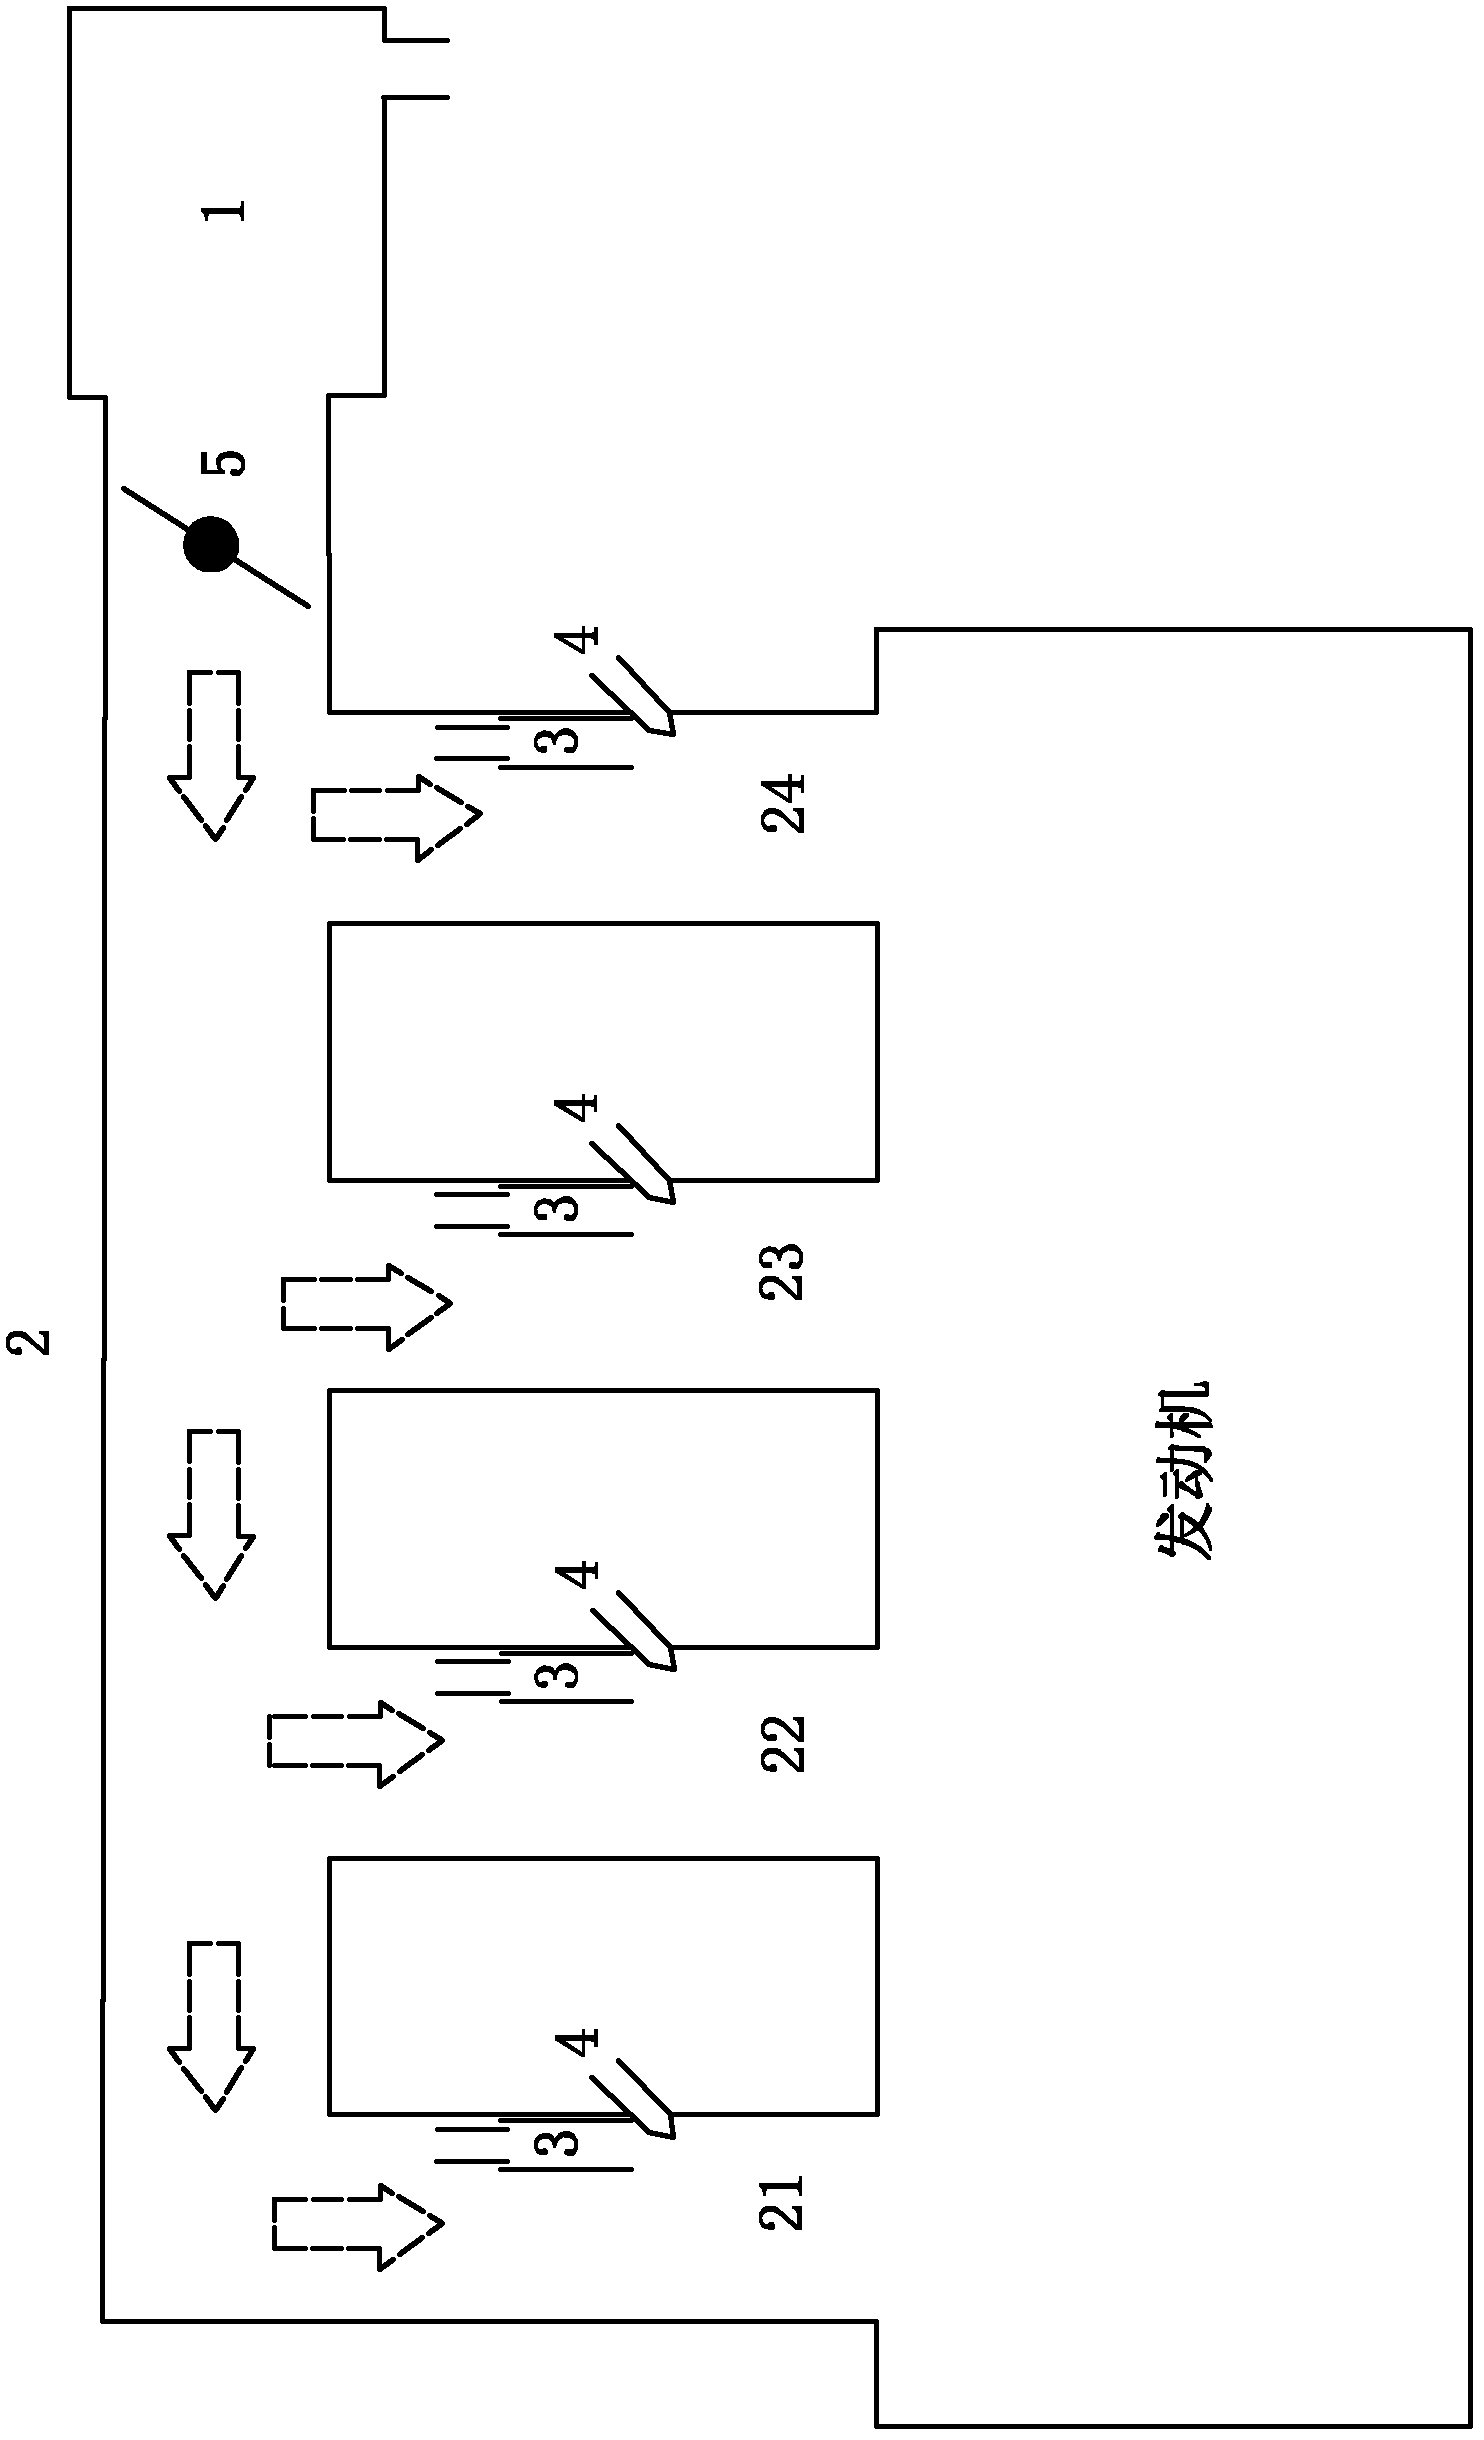 Throat-type inlet manifold of electrical control fuel jet-type internal combustion engine